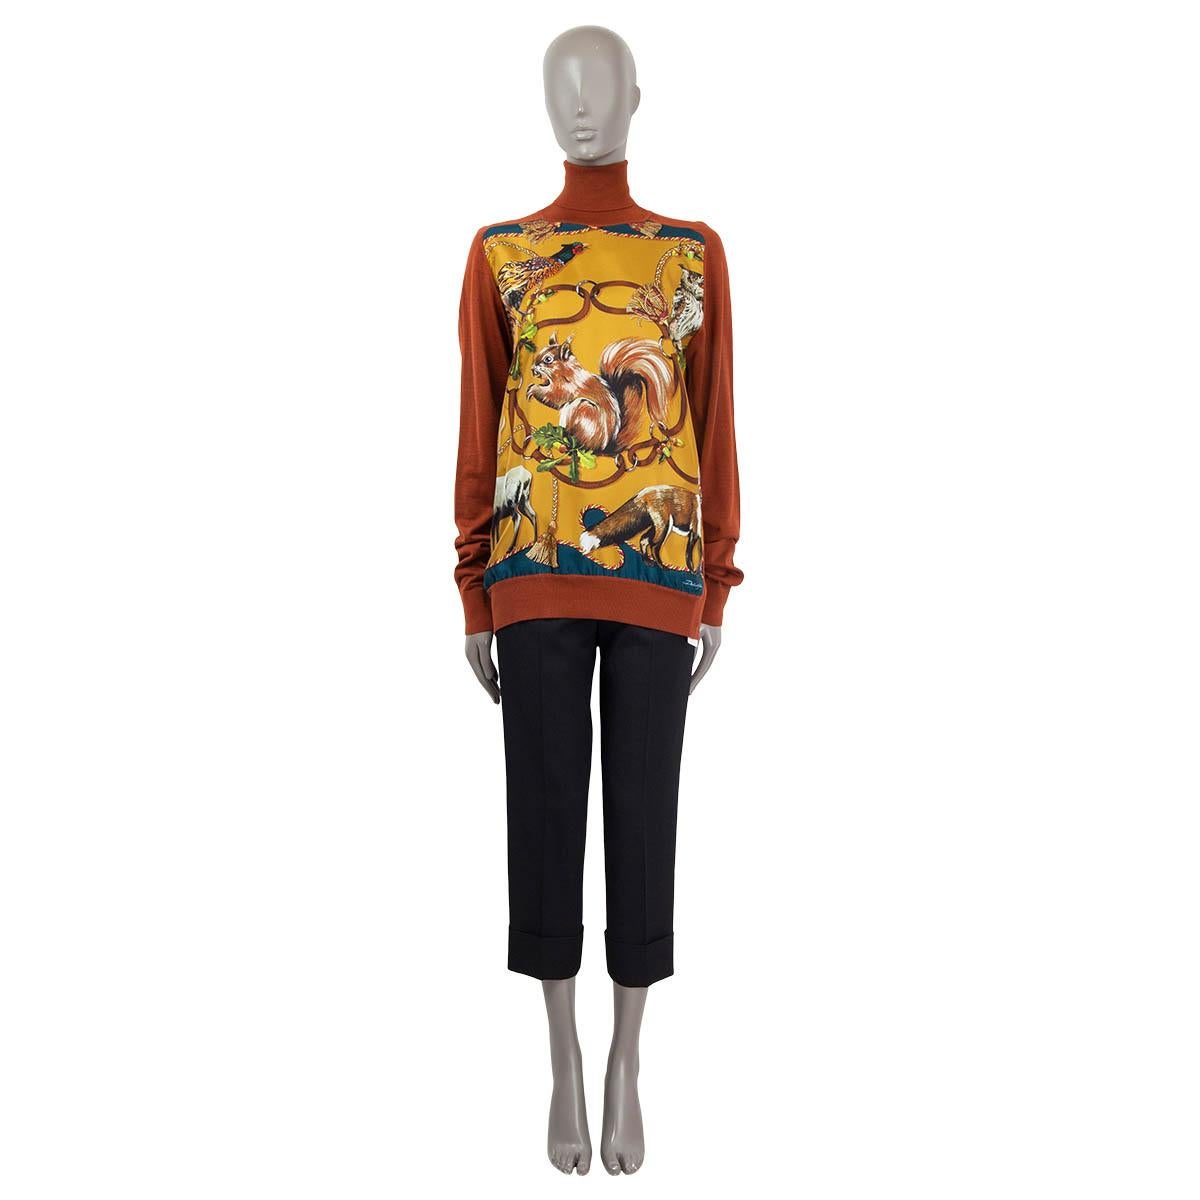 100% authentic Dolce&Gabbana light turtleneck in cashmere (60%) and silk (40%) with a hunting pattern on the front in rust, mustard, brown, green and black. Has been worn and is in excellent condition. New with tags.

2014